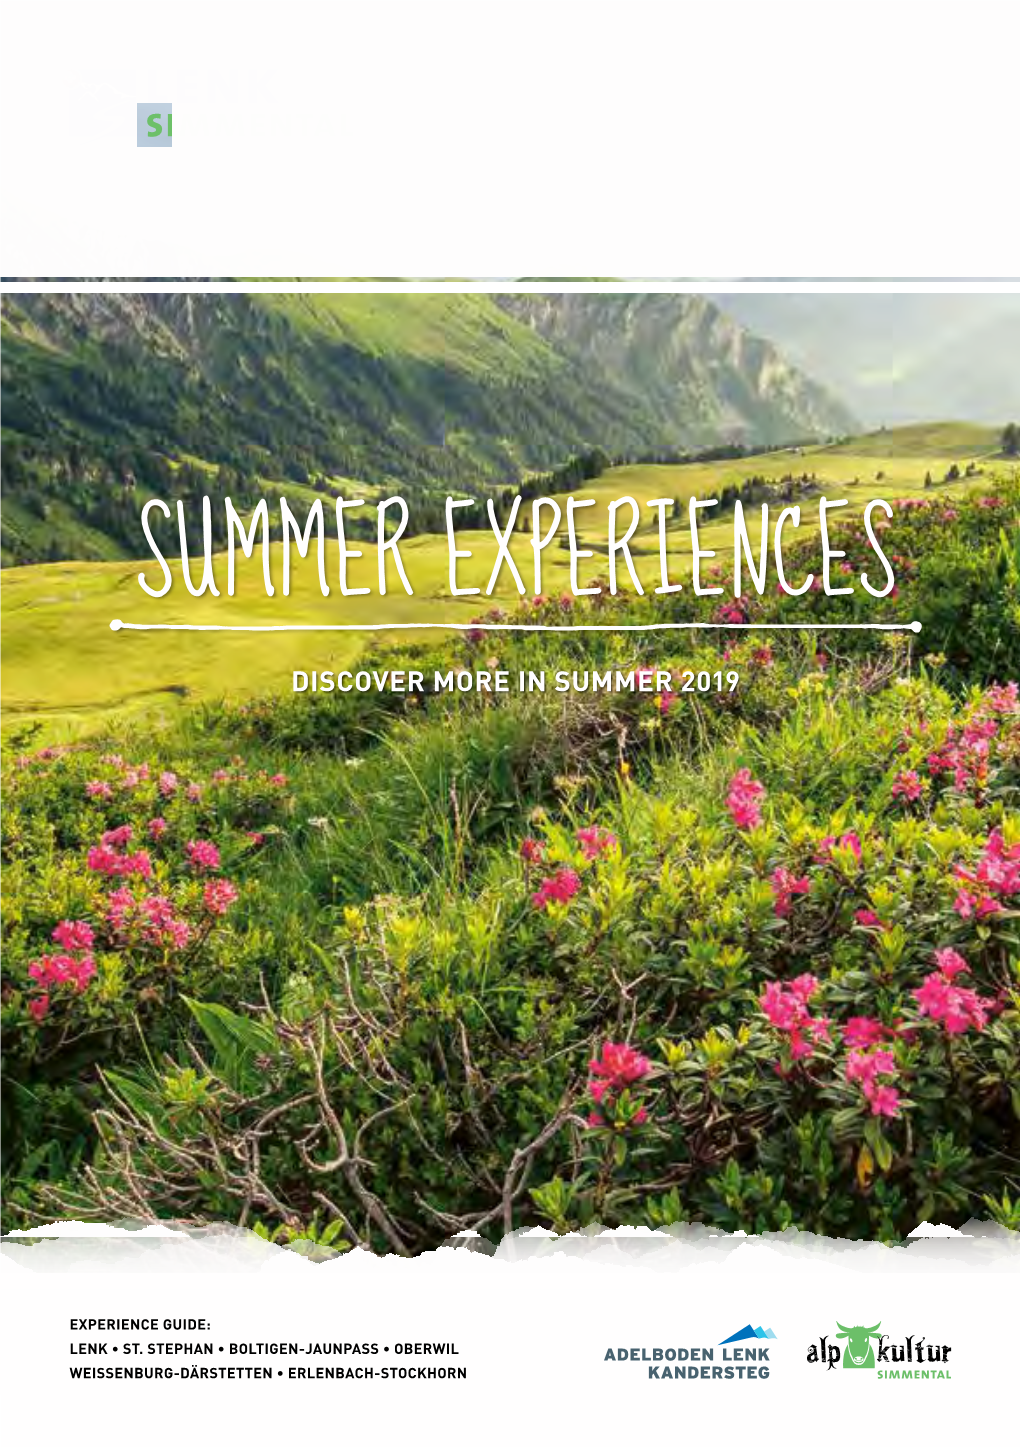 Summer Experiences Discover More in Summer 2019